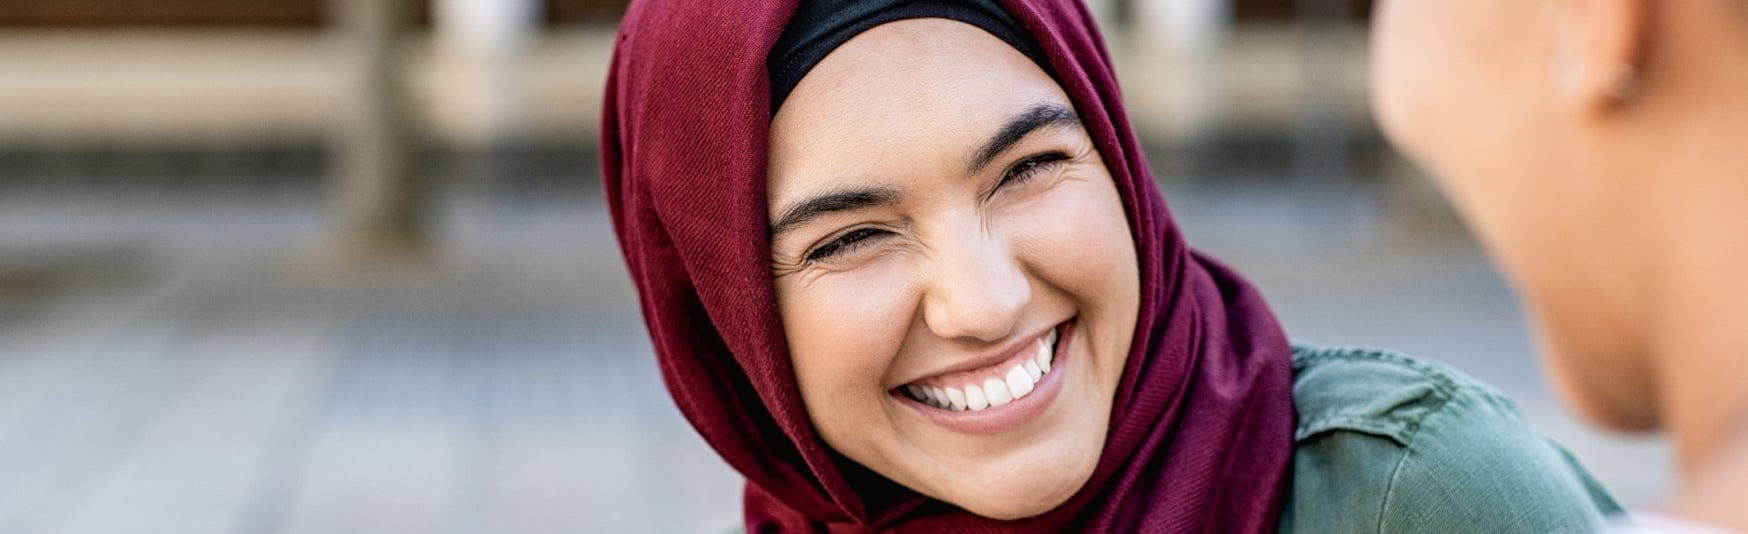 LP_Header-1748x534-muslim-woman-smiling-hijab-conversing-with-coworker-outside